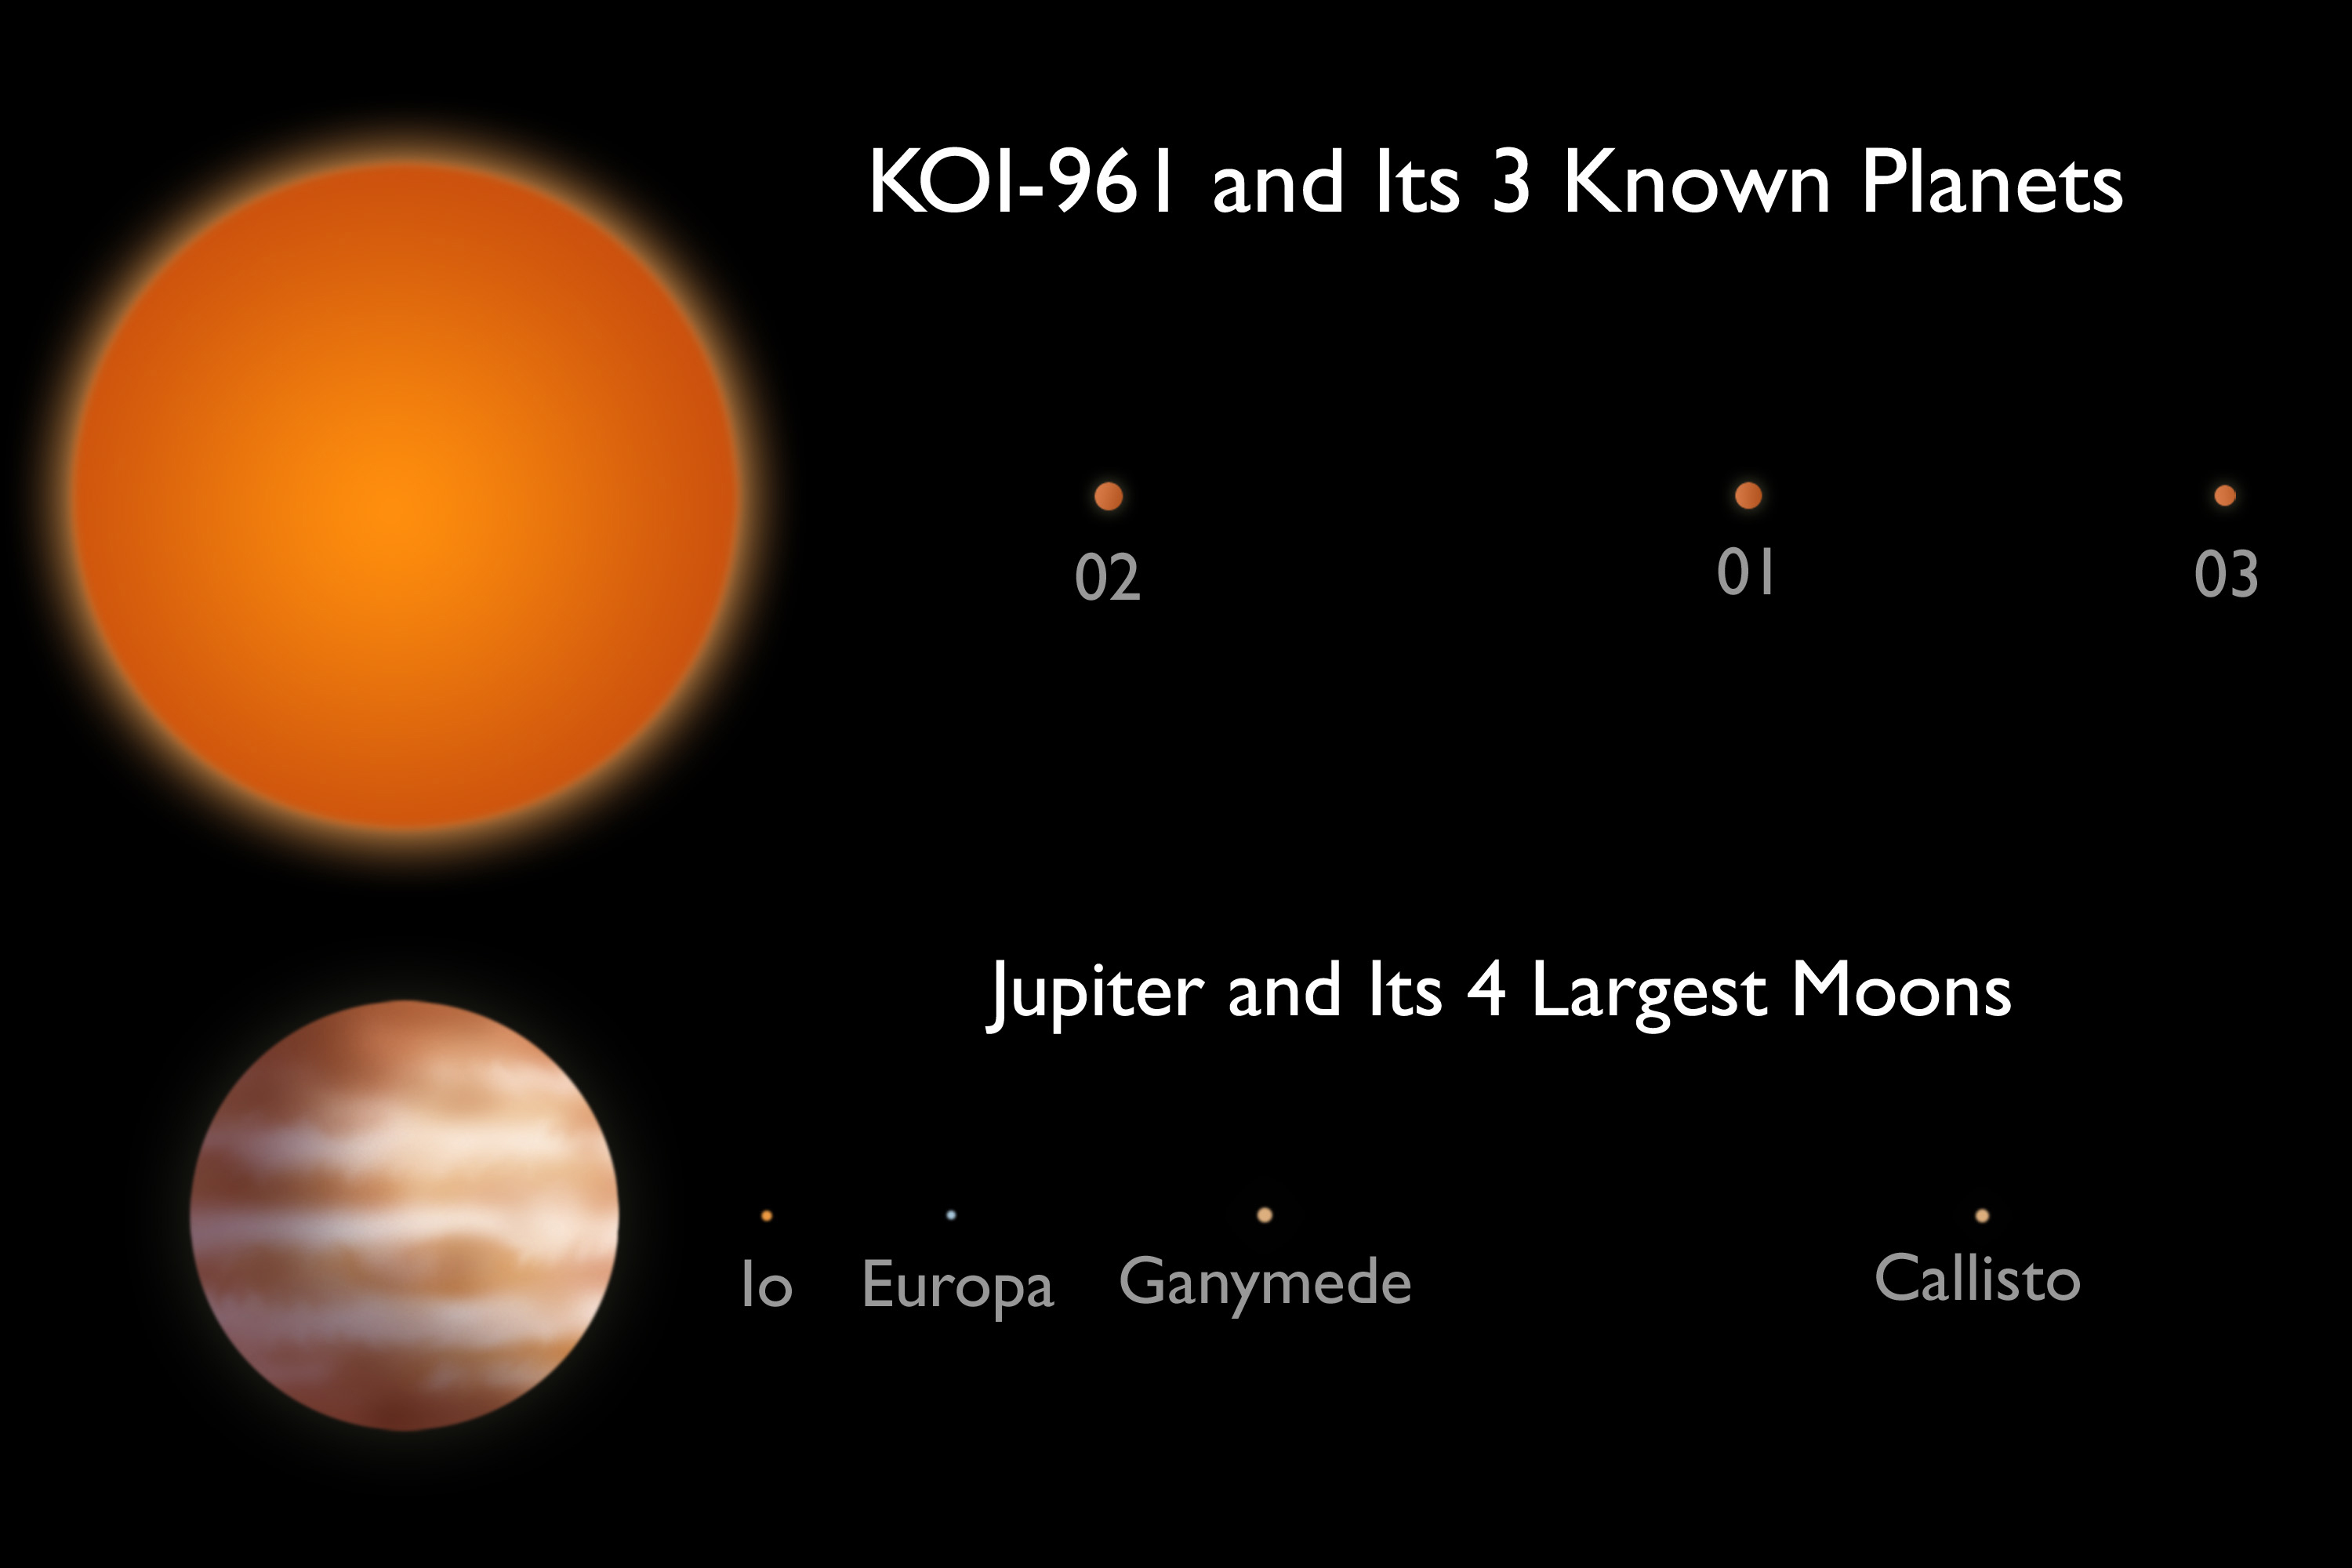 KOI-961 and its three known planets